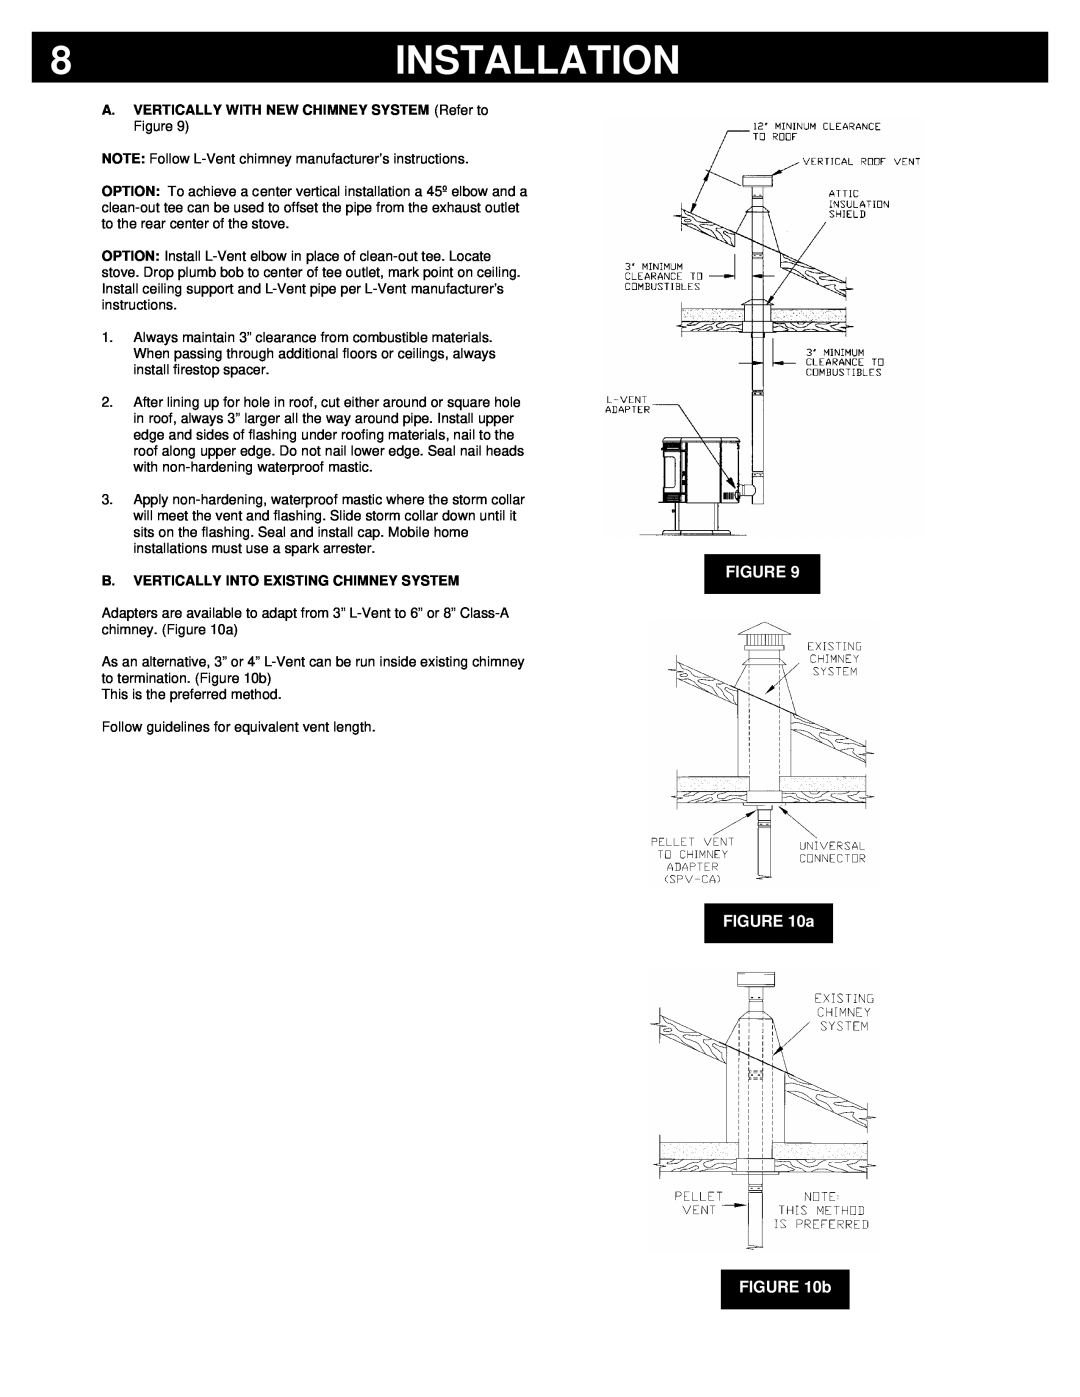 Breckwell P2000FS, P2000I owner manual Installation, FIGURE a b, B.Vertically Into Existing Chimney System 